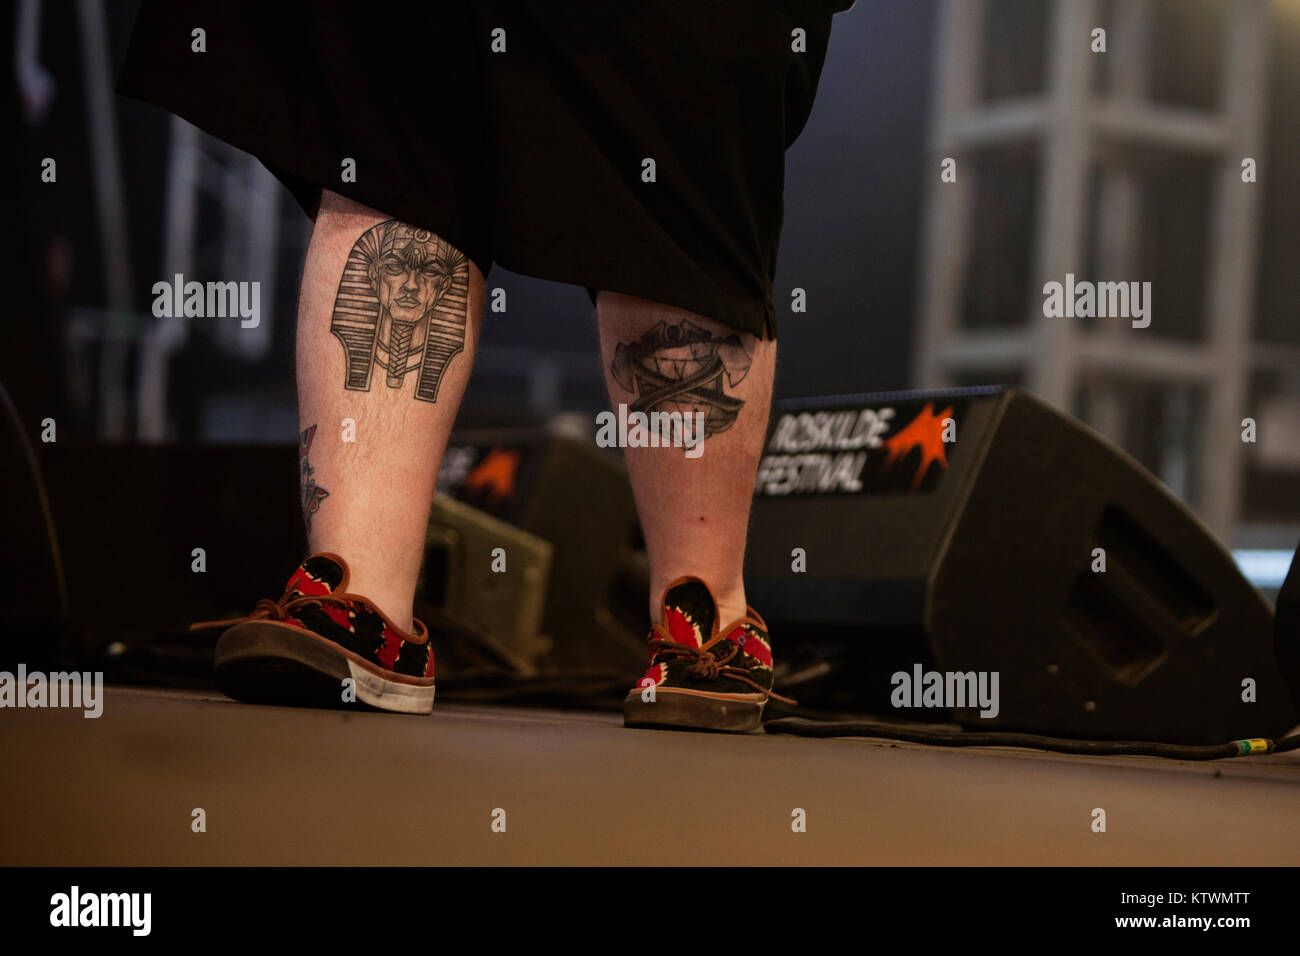 Rappers are mostly tattooed and the American rapper Action Bronson is no exception. He has tattoos all over his body like here on his legs. Denmark 2013. Stock Photo